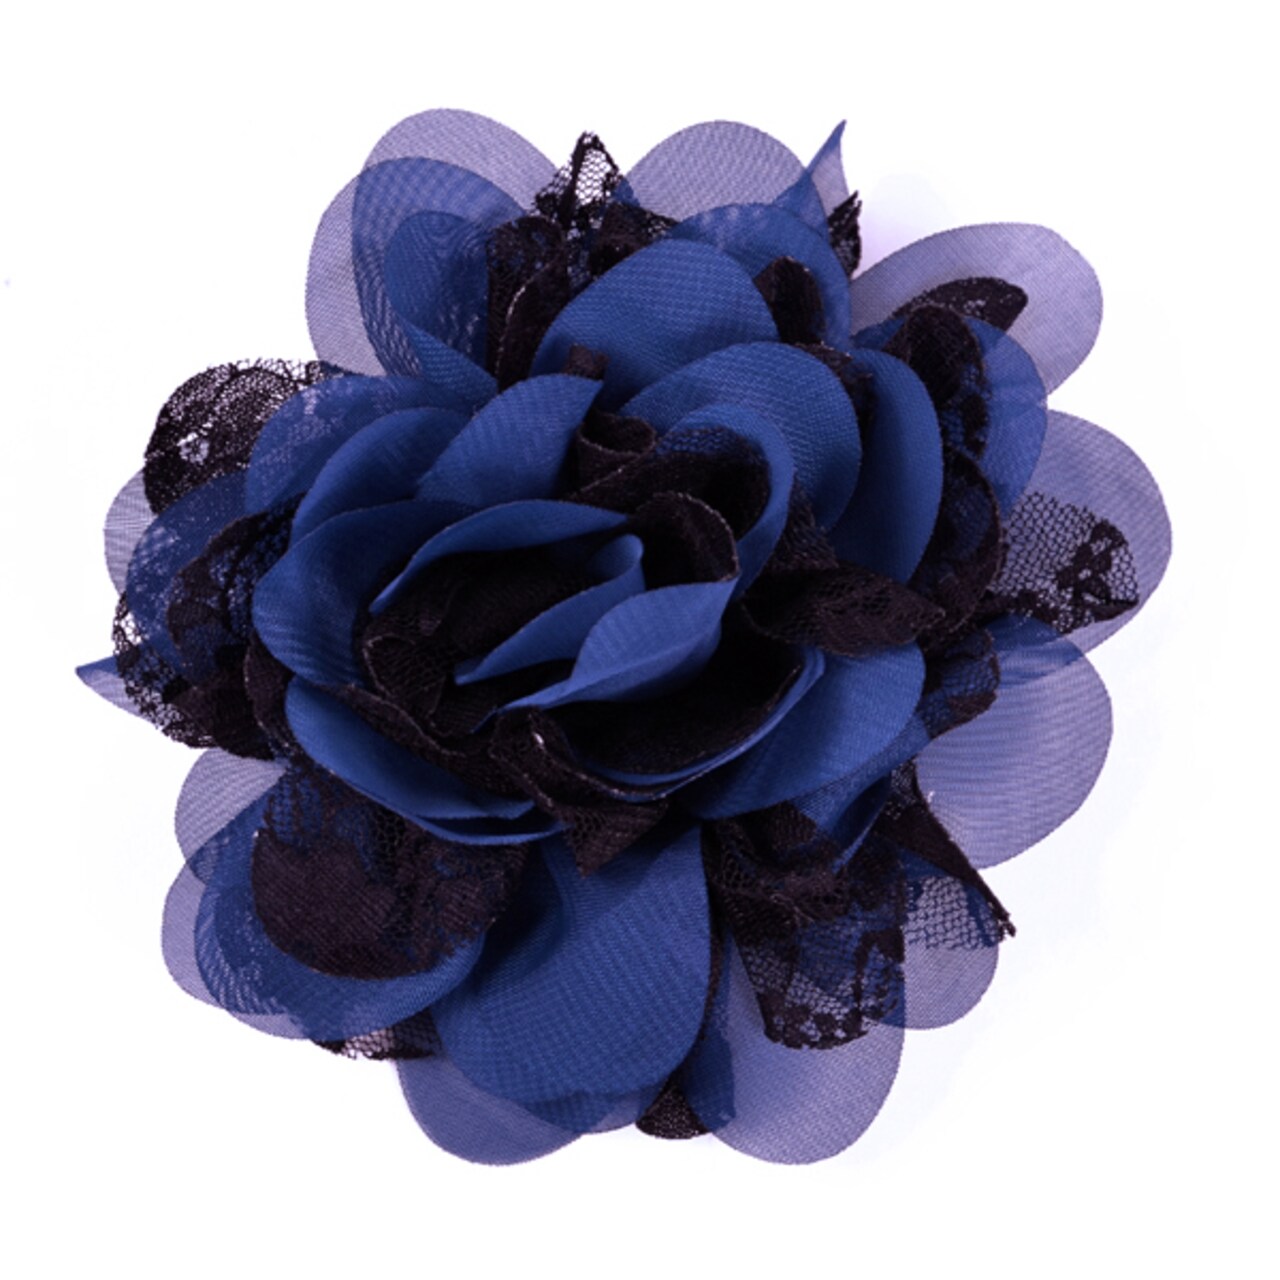 Mary Kate Lace Chiffon Flower Brooch Pin and Hair Clip Accessory